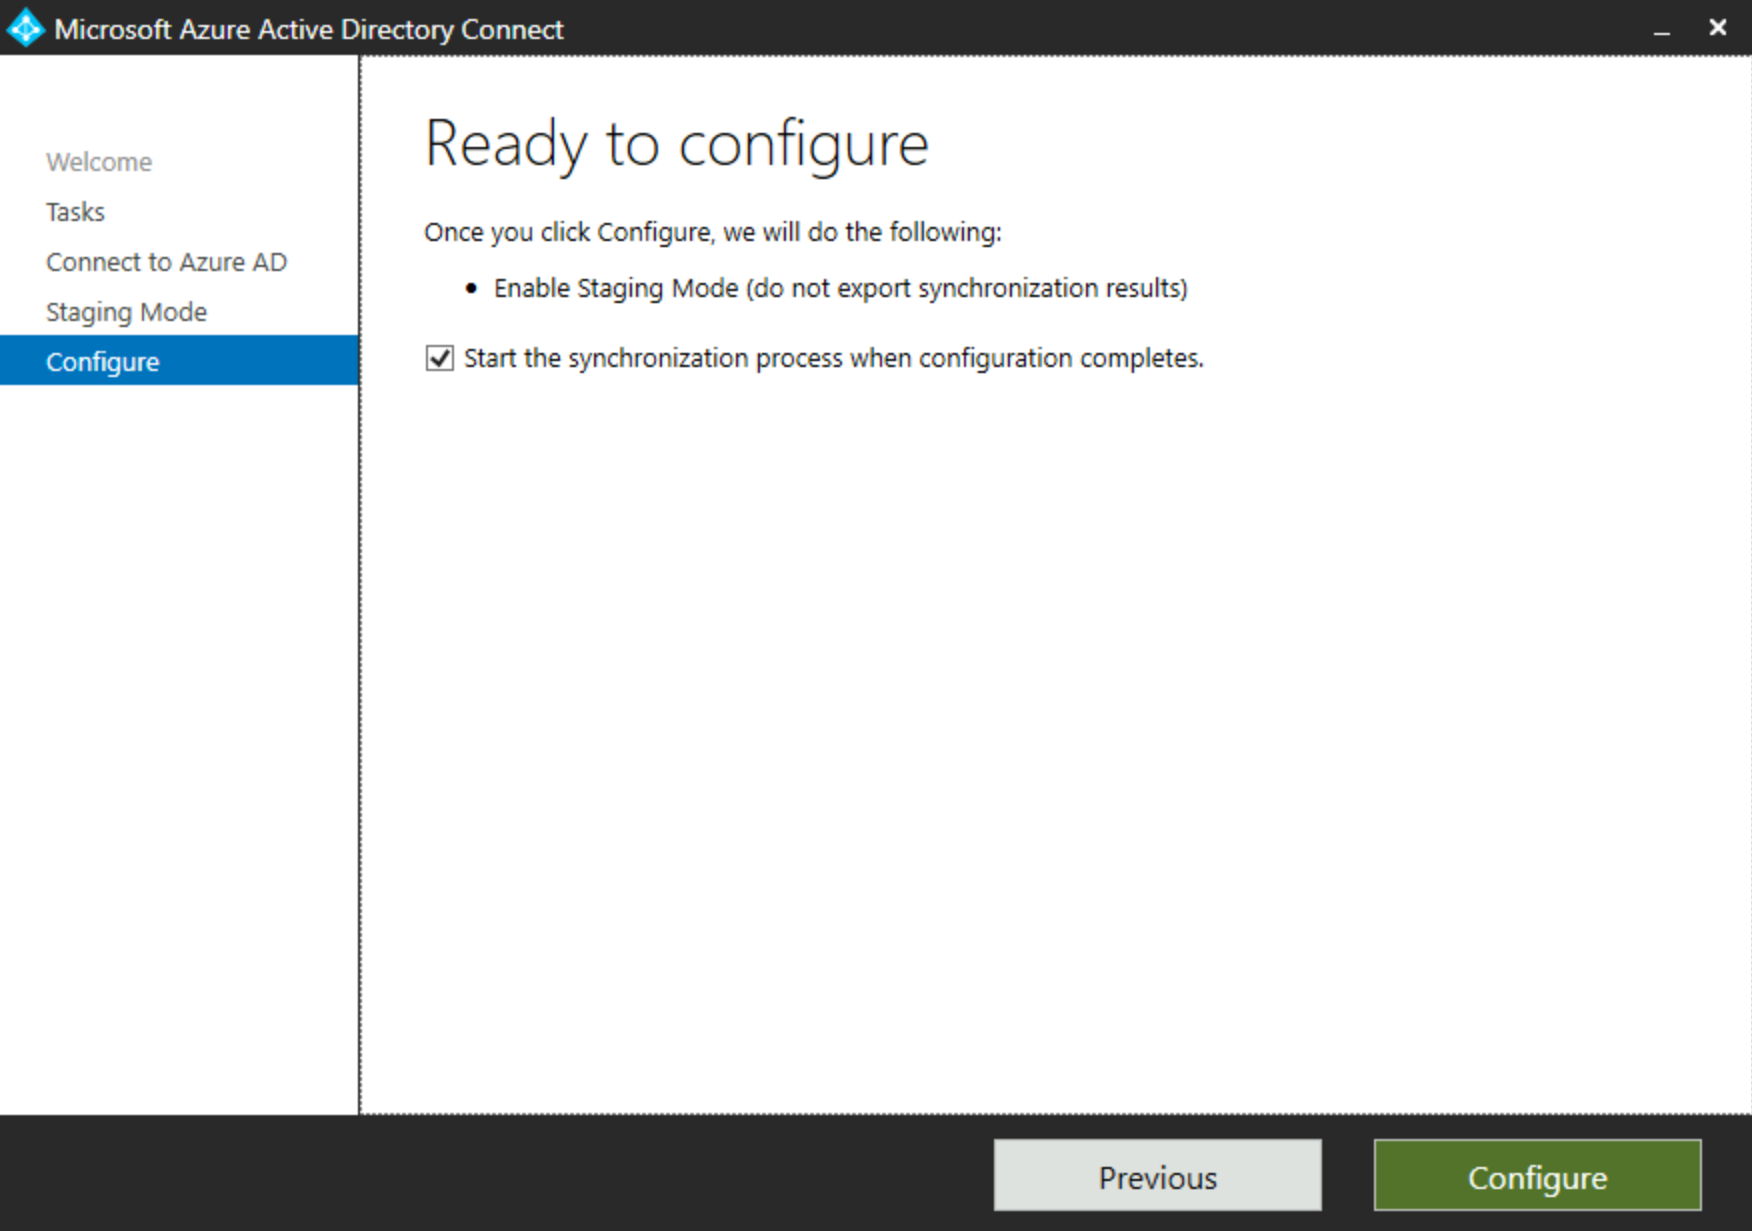 Screenshot shows Ready to Configure screen in the Active Azure AD Connect dialog box.